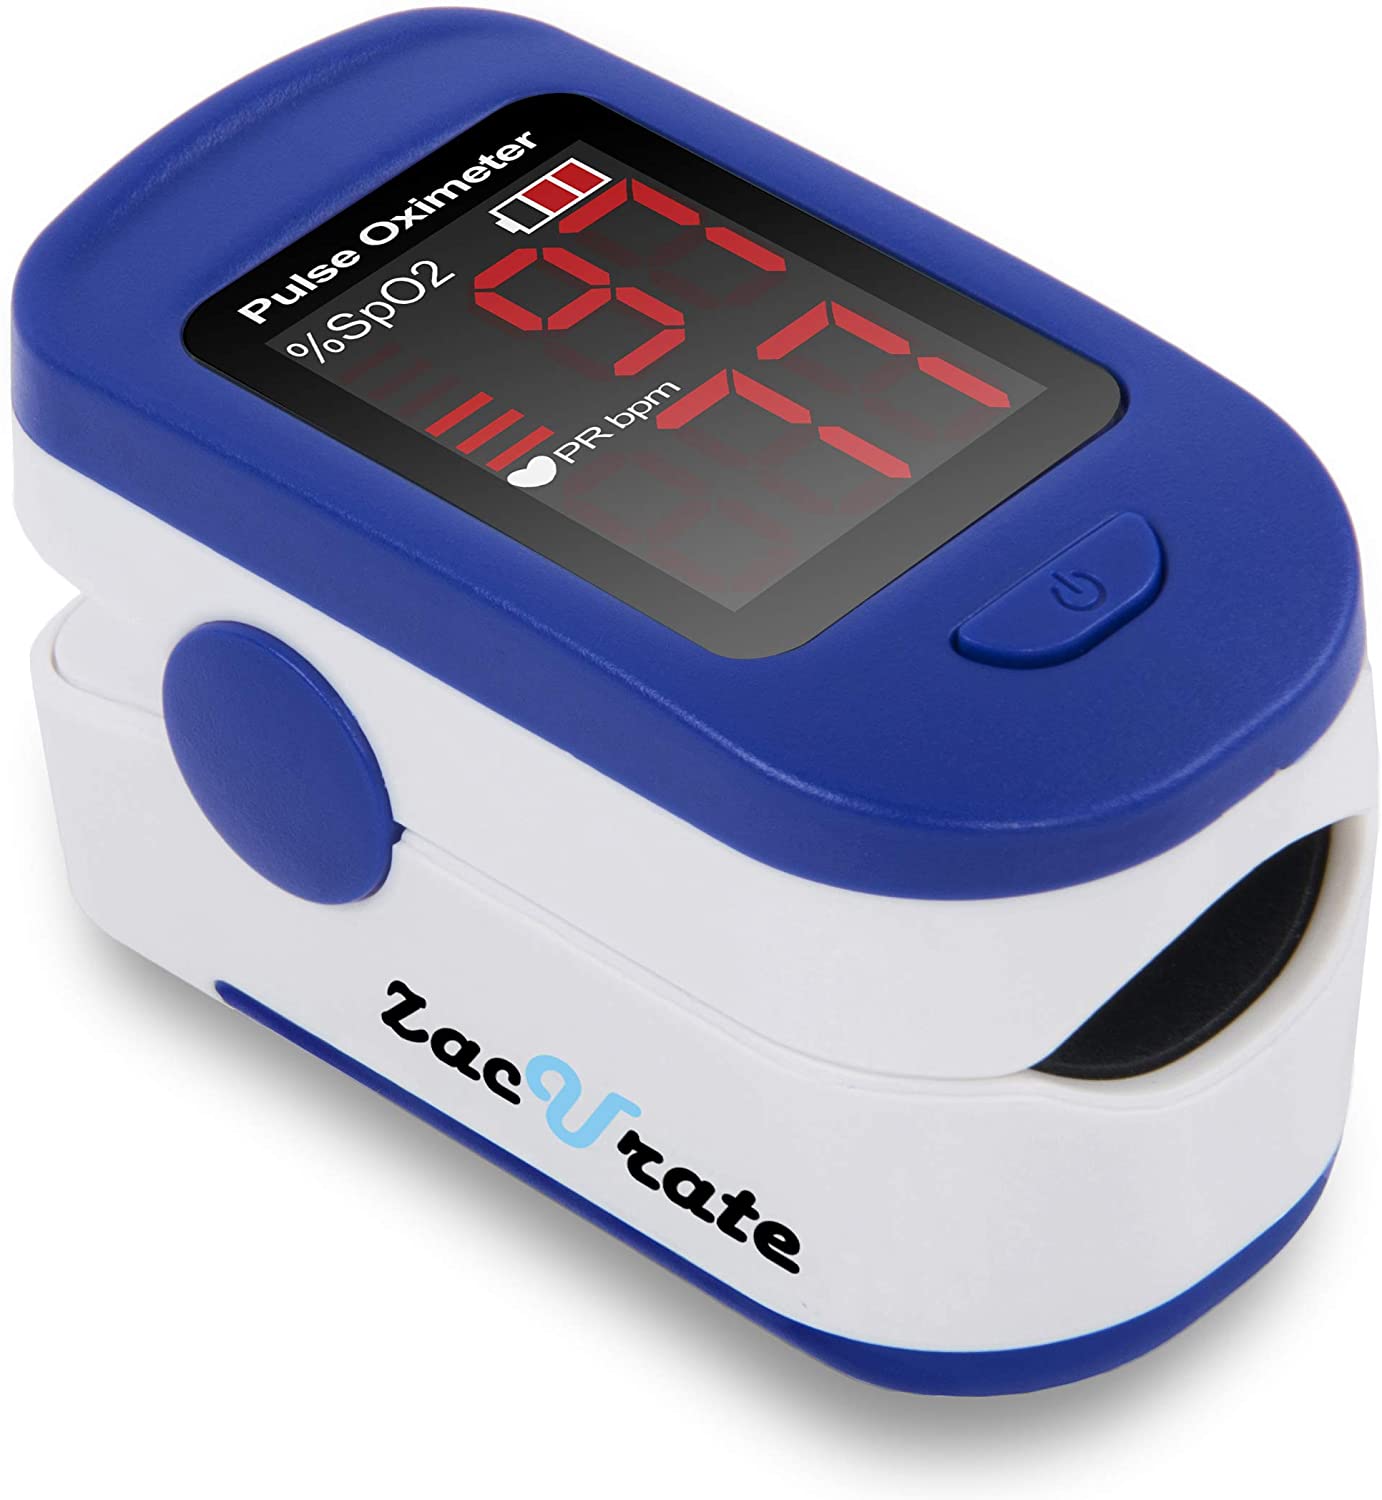 Zacurate 500BL Fingertip Pulse Oximeter Review